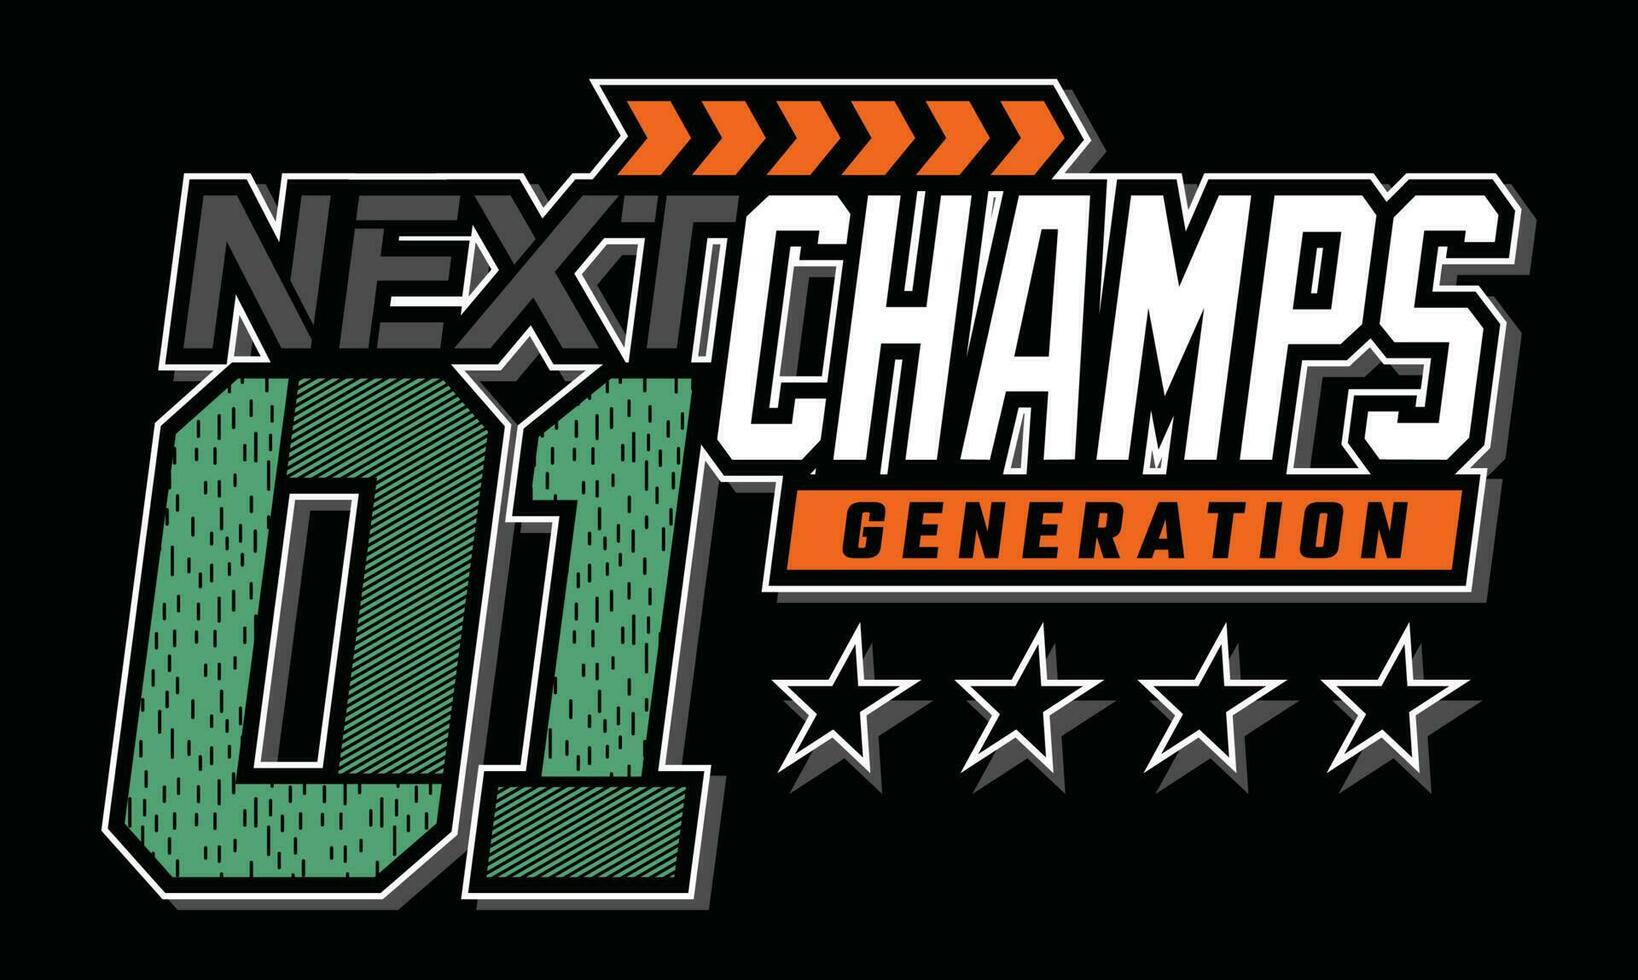 Next champs element of modern men fashion in lettering typography graphic design.Vector illustration.tshirt,clothing,apparel and other uses vector